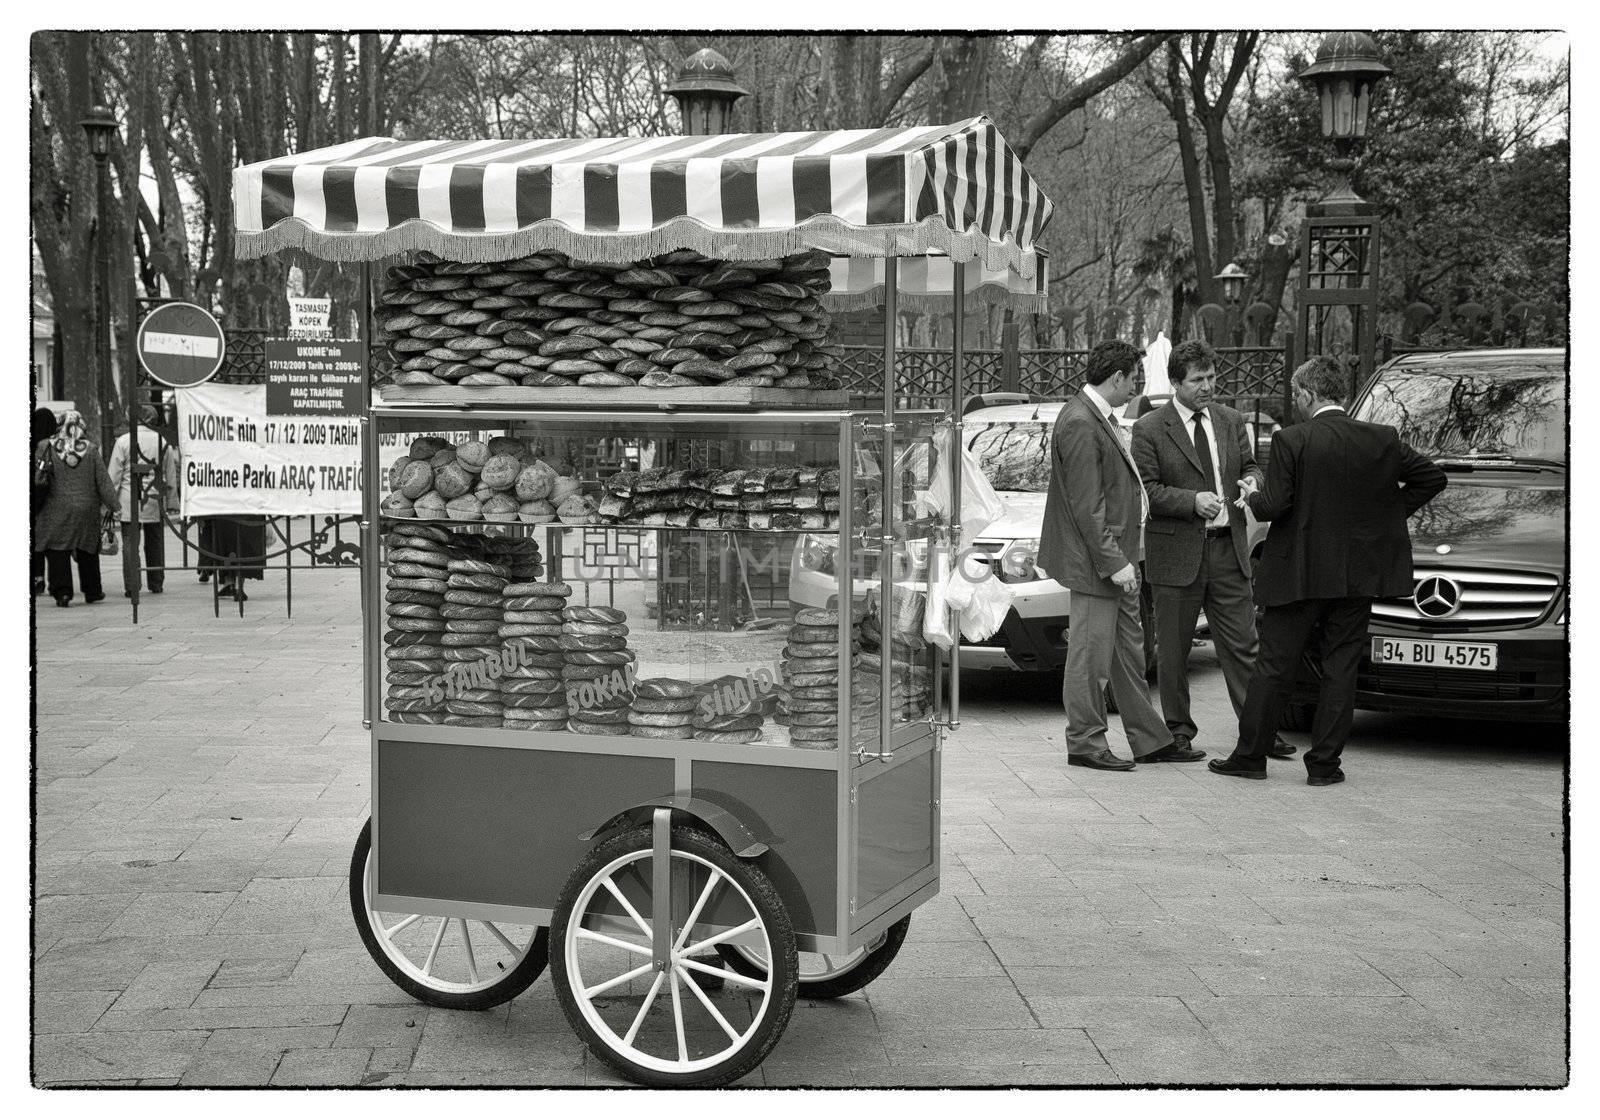 SIMIT CART GULHANE PARK, ISTANBUL, TYRKEY, APRIL 15, 2012: Simits for sale on the parking lot outside Gulhane Park, Istanbul, Turkey.